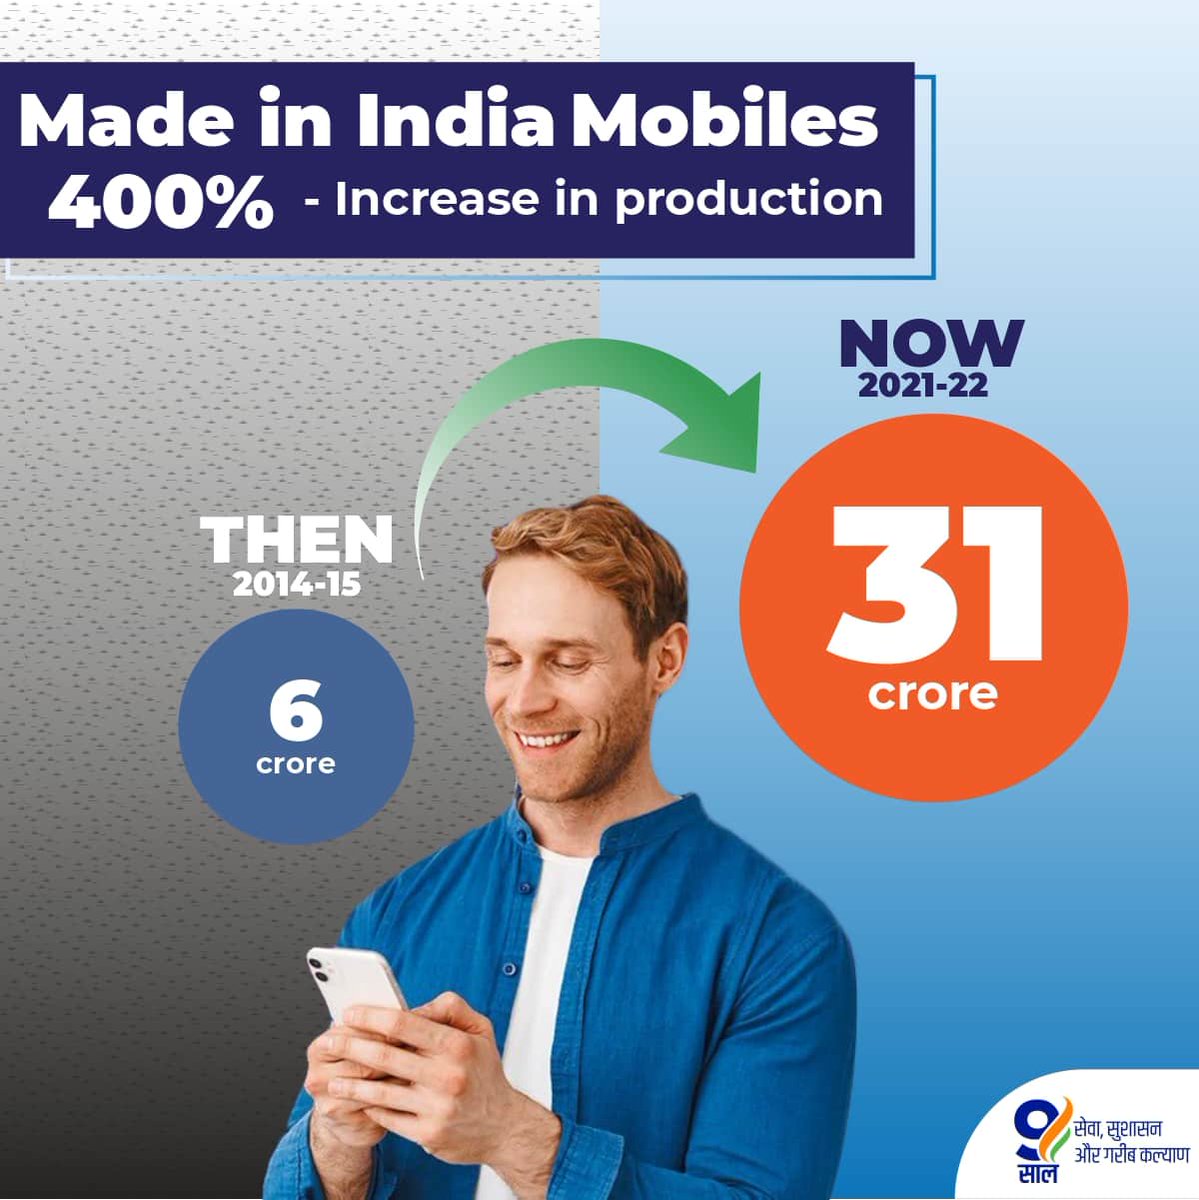 India emerged as the second largest manufacturer of mobile phones in 2021-22, a testament to PM Modi's vision of an Aatmanirbhar Bharat.

#9YearsOfEaseOfBusiness